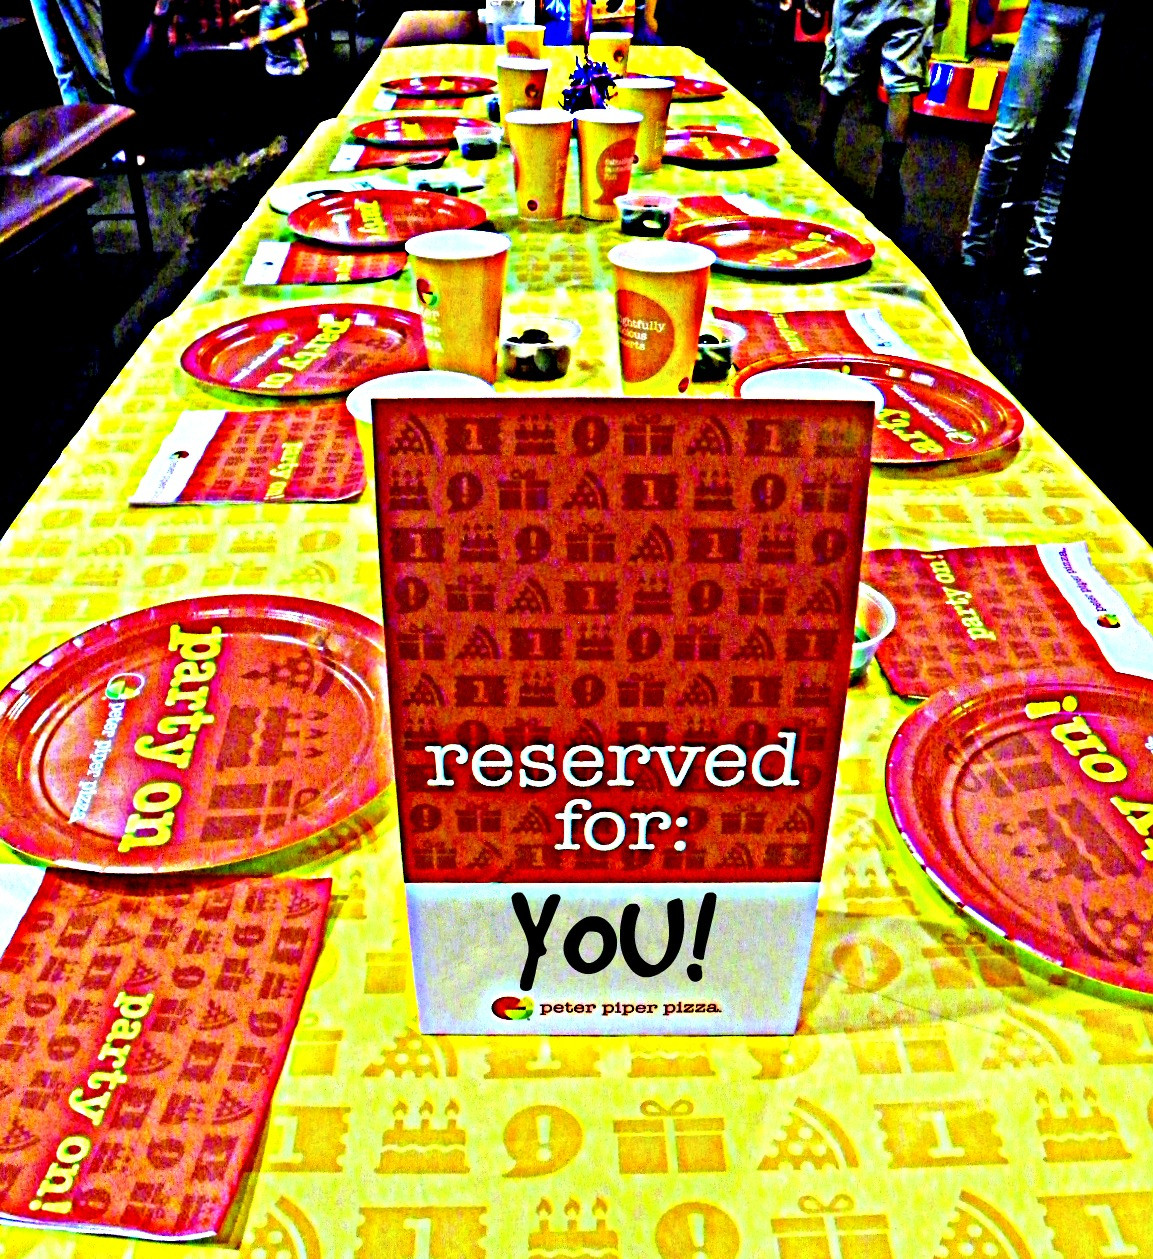 Peter Piper Pizza Birthday Party
 Peter Piper Pizza Birthday Parties Hassle Free Family Fun